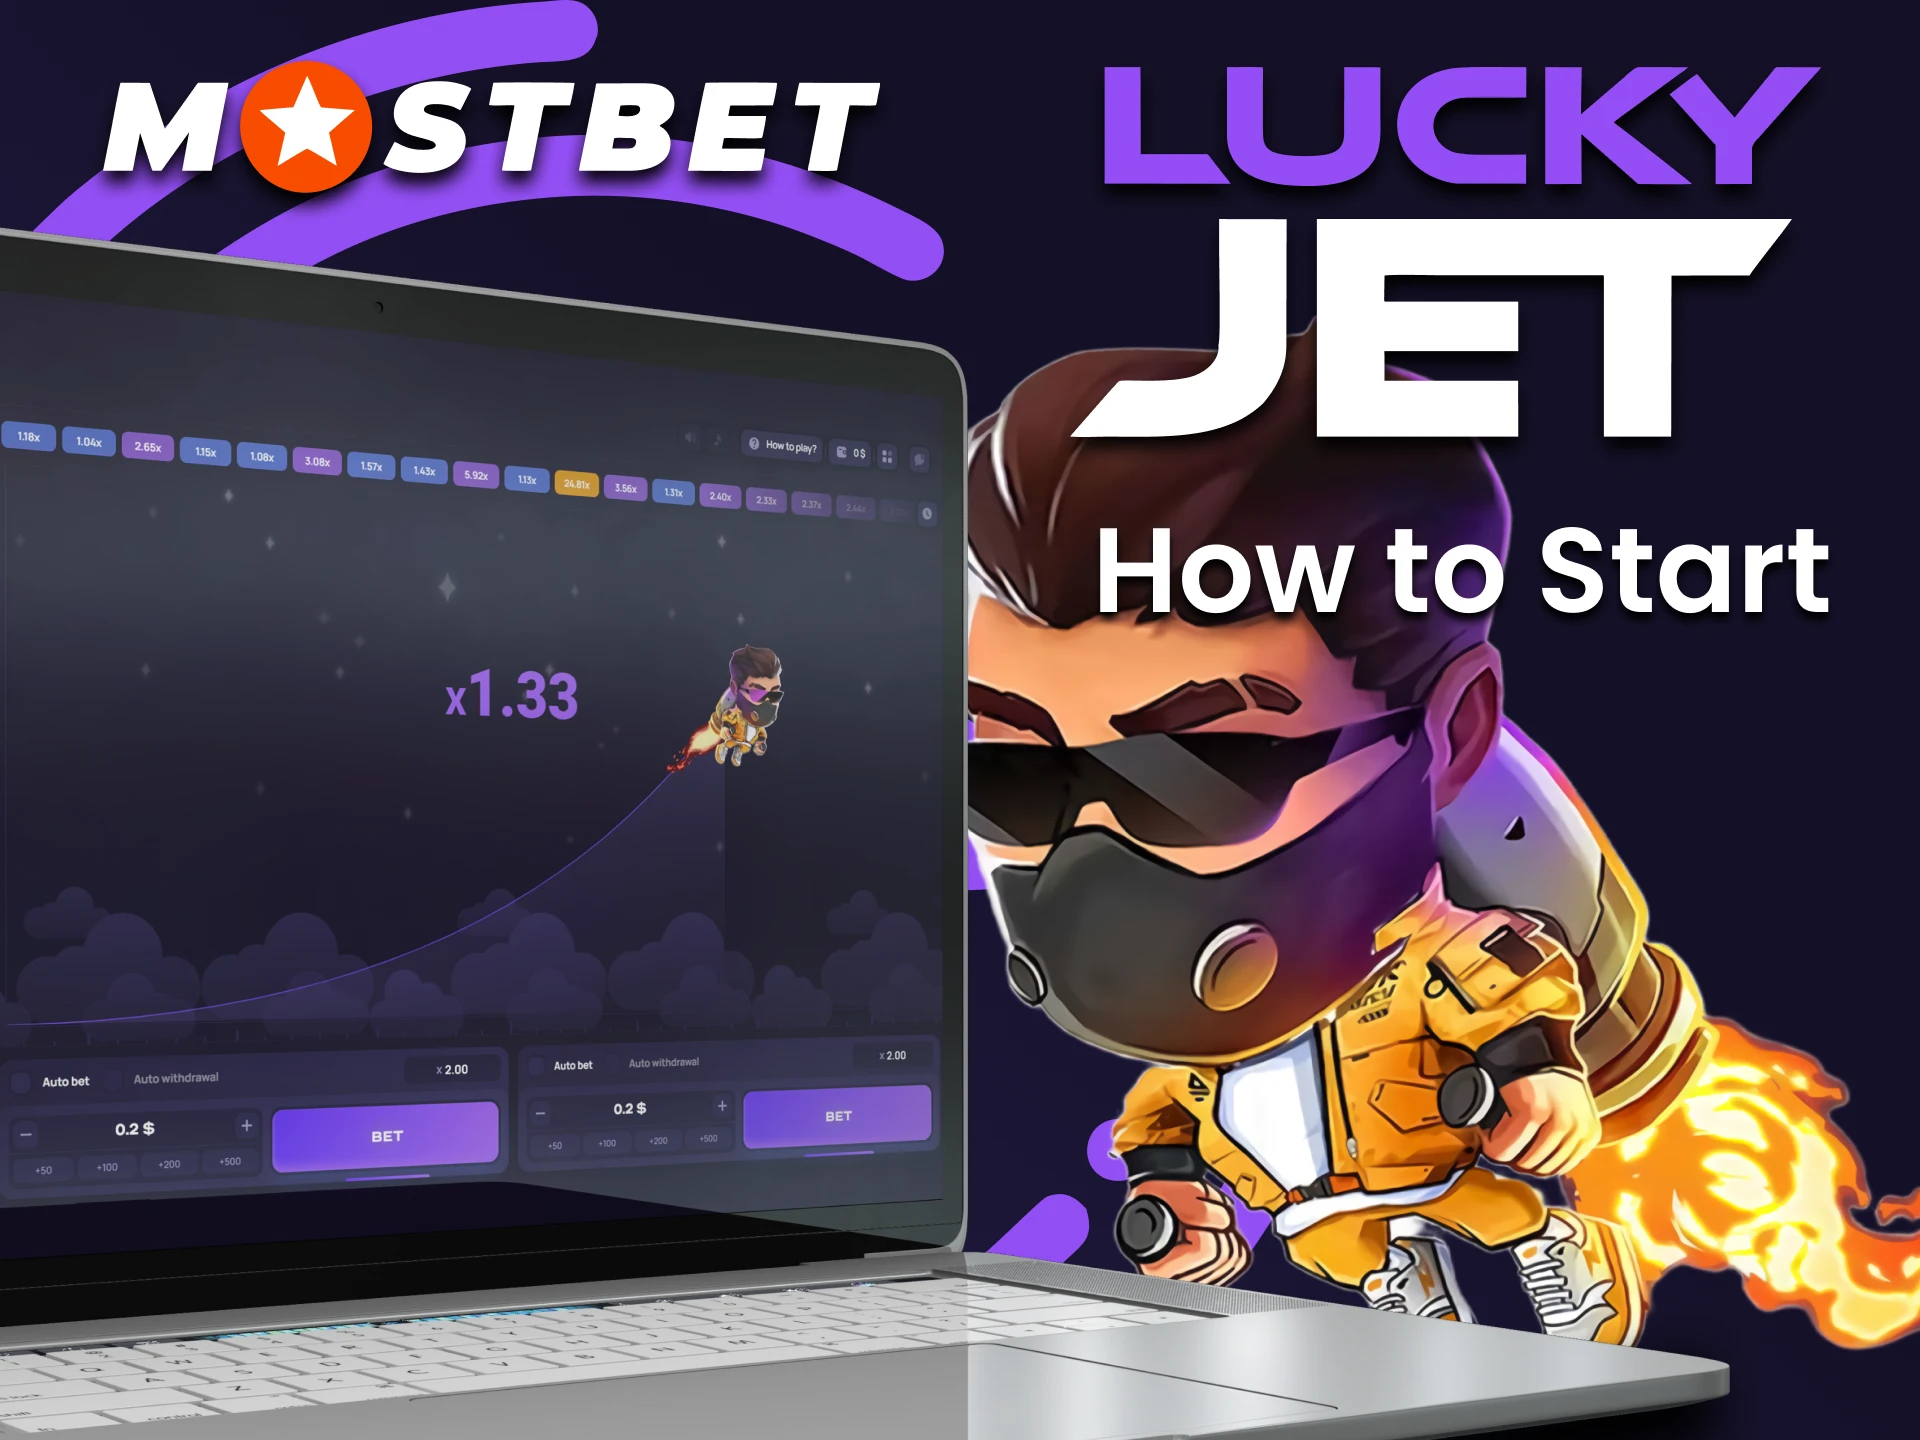 Select the games section on Mostbet to play Lucky Jet.